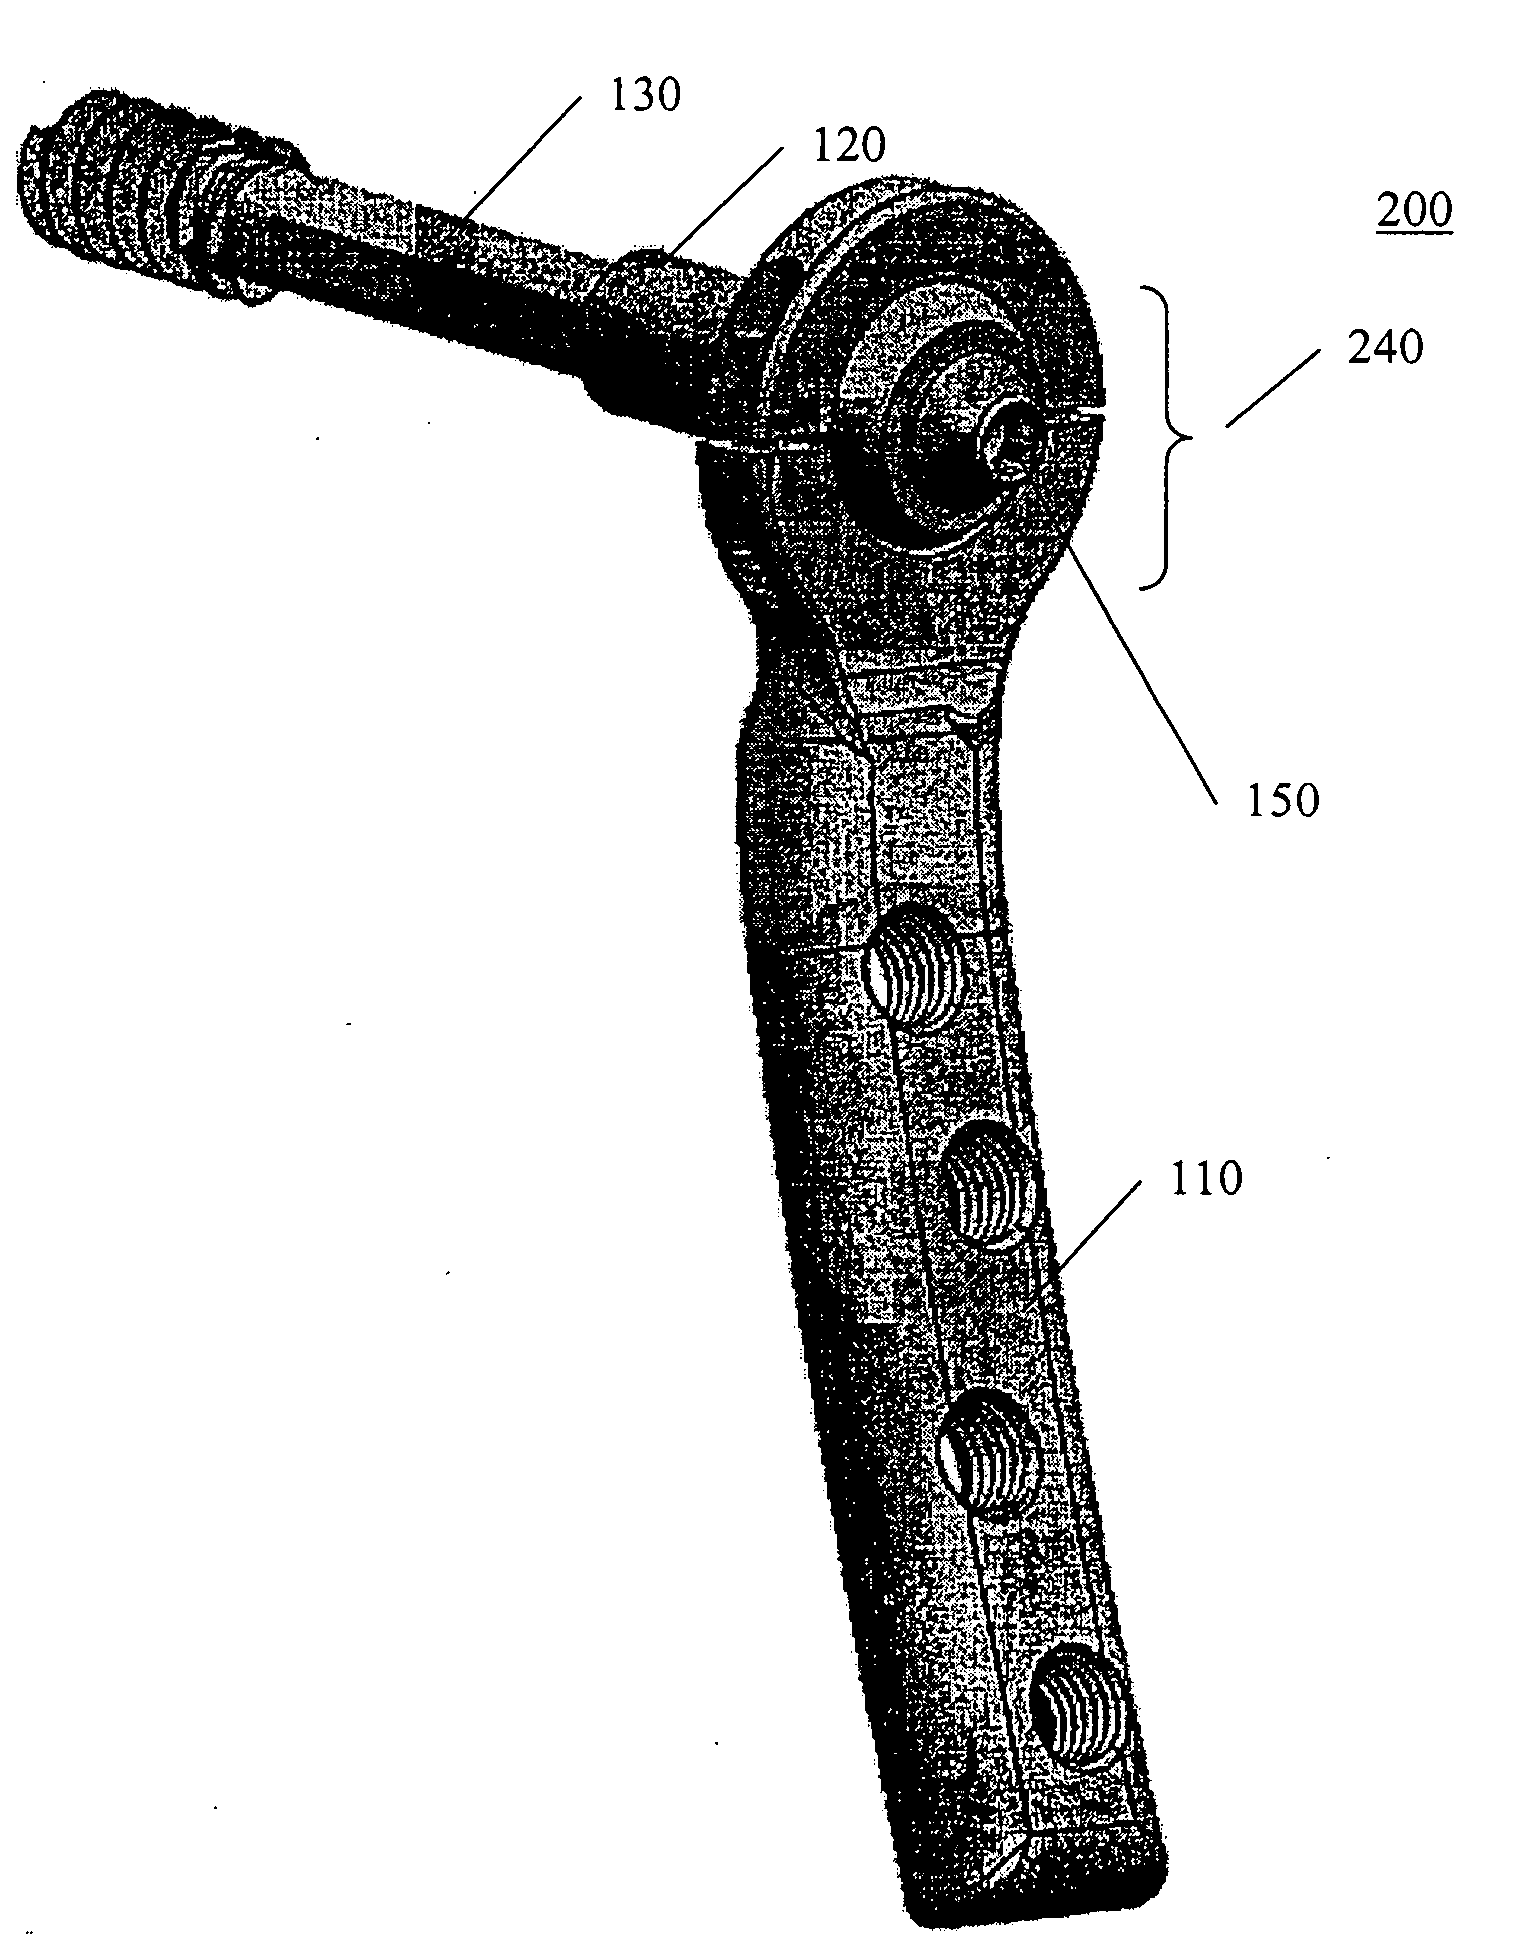 Methods for treating fractures of the femur and femoral fracture devices